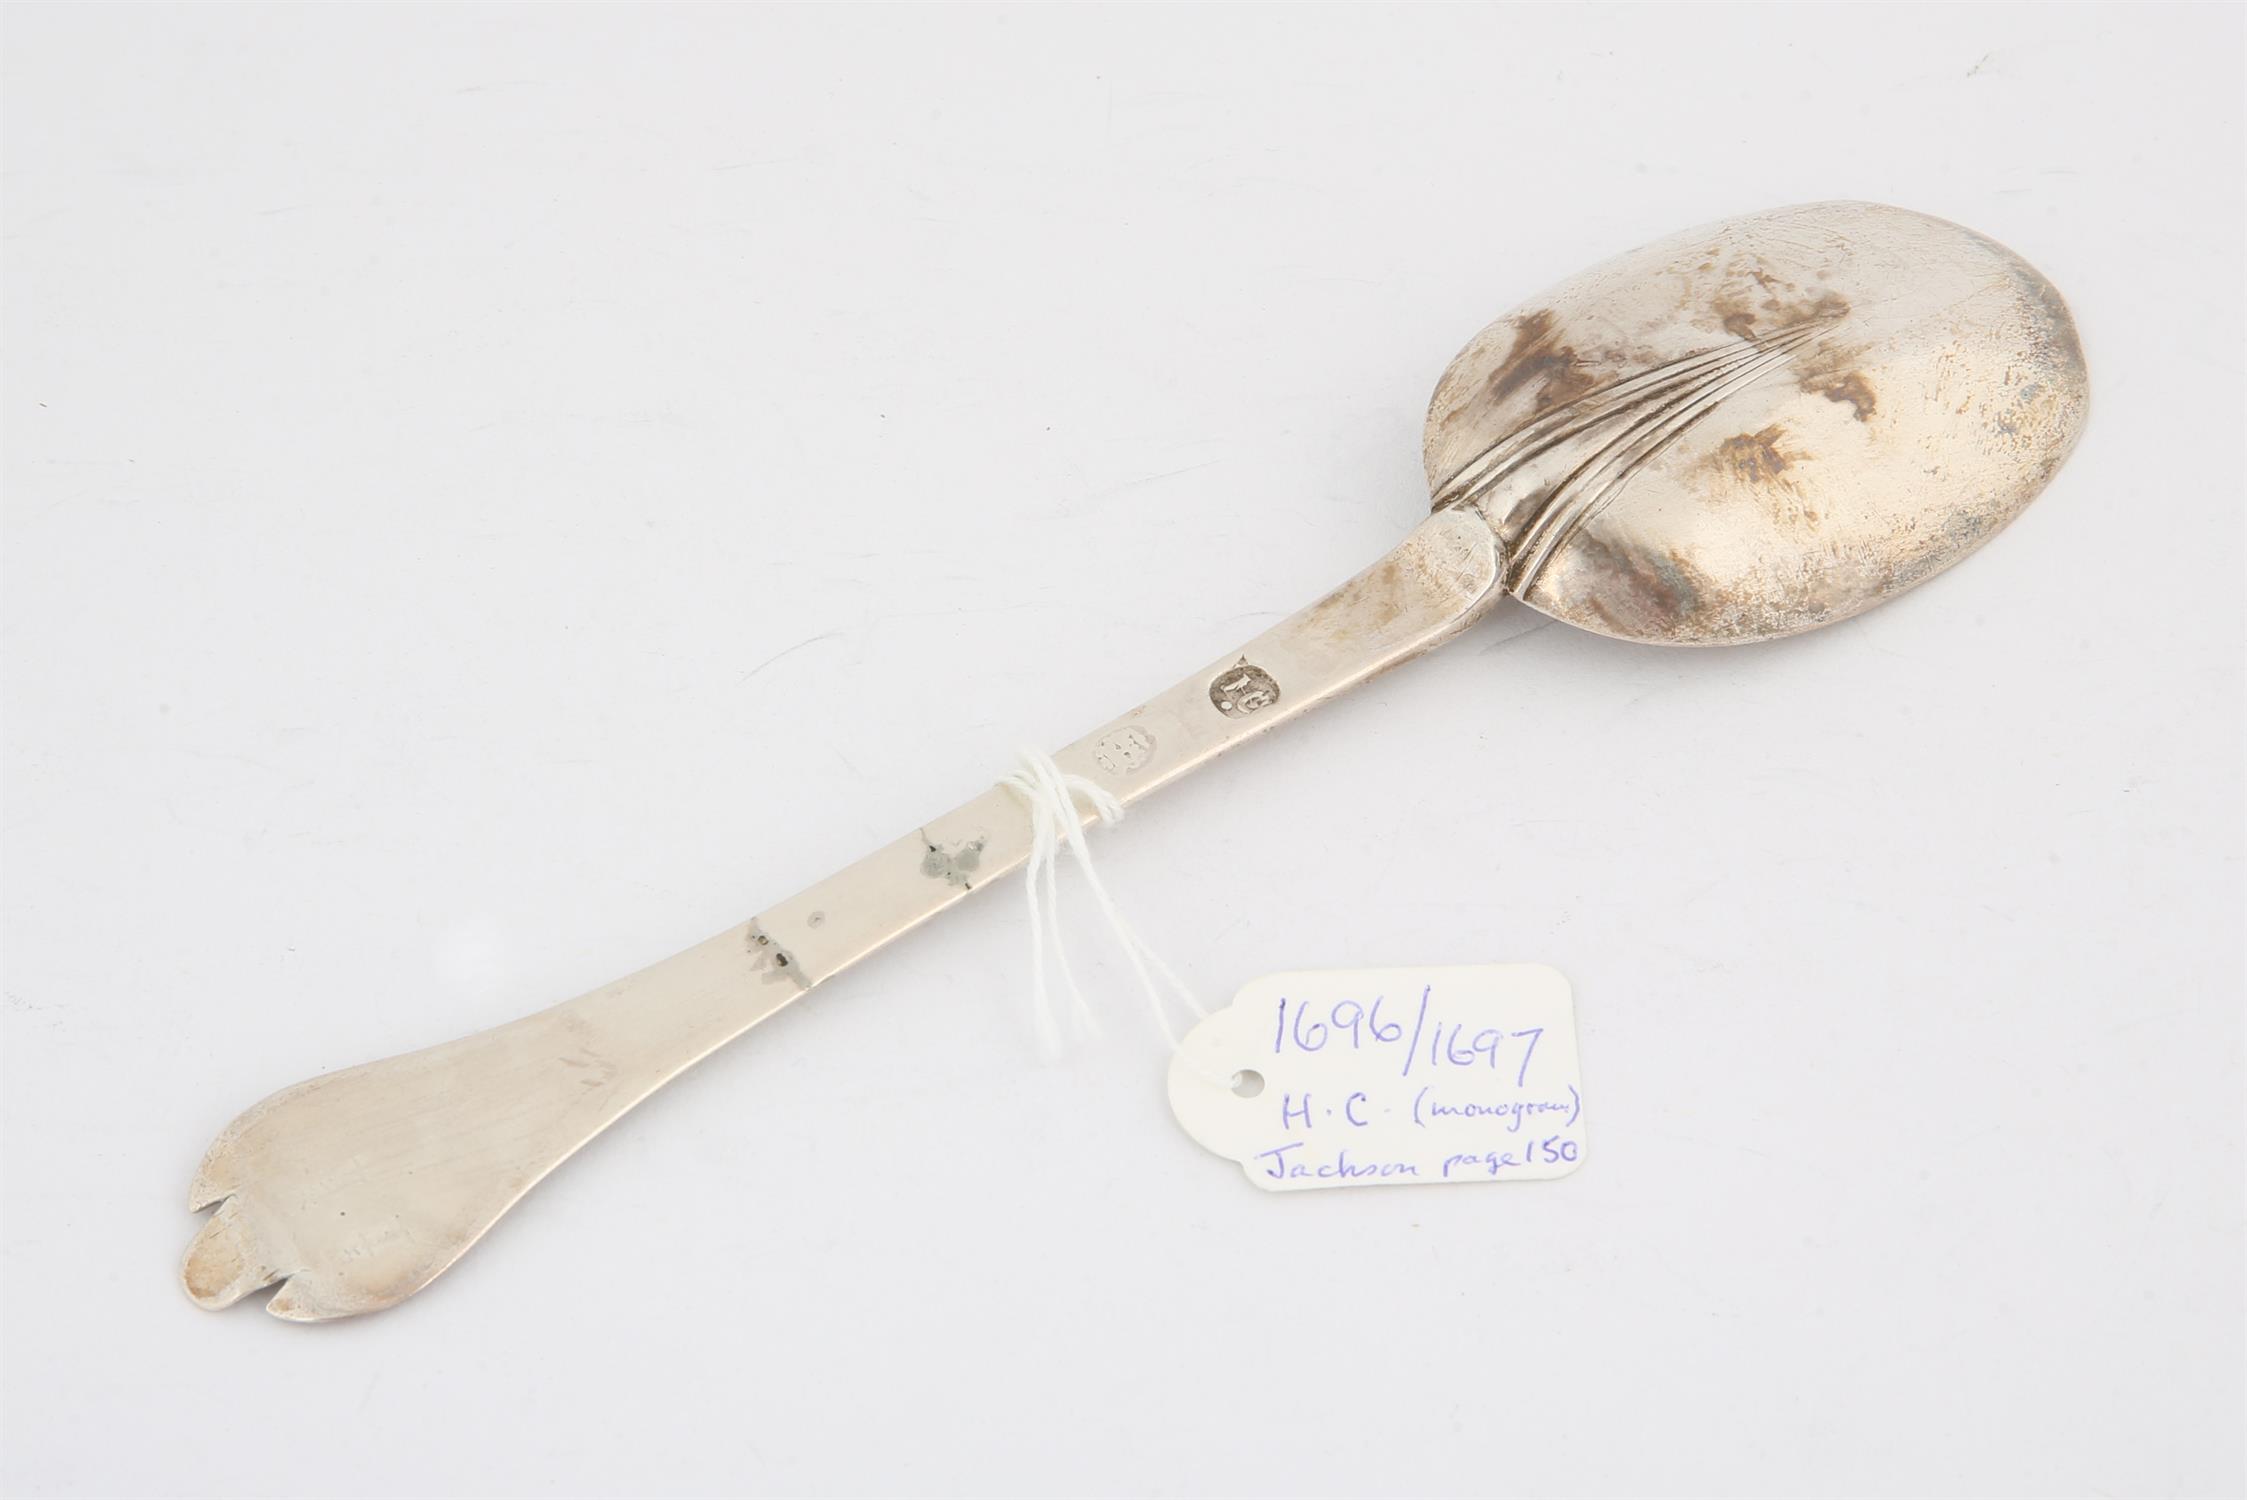 Late 17th century trifid end silver spoon SILVER COLLECTION OF SIR RAY TINDLE CBE DL - Image 4 of 4